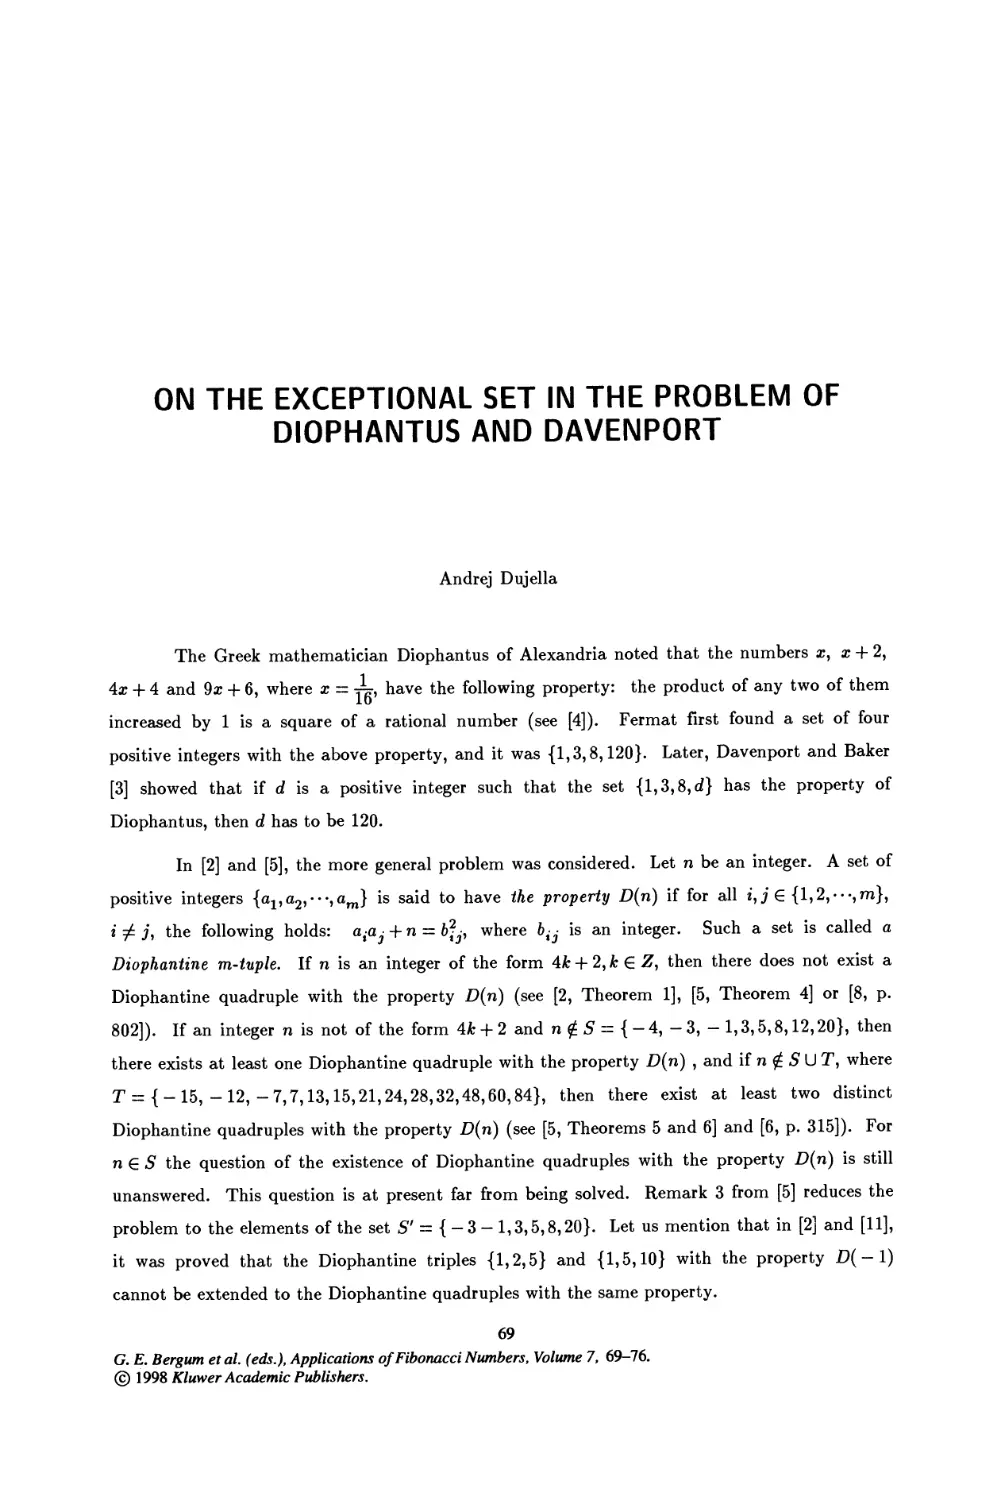 10. On the Exceptional Set in the Problem of Diophantus and Davenport